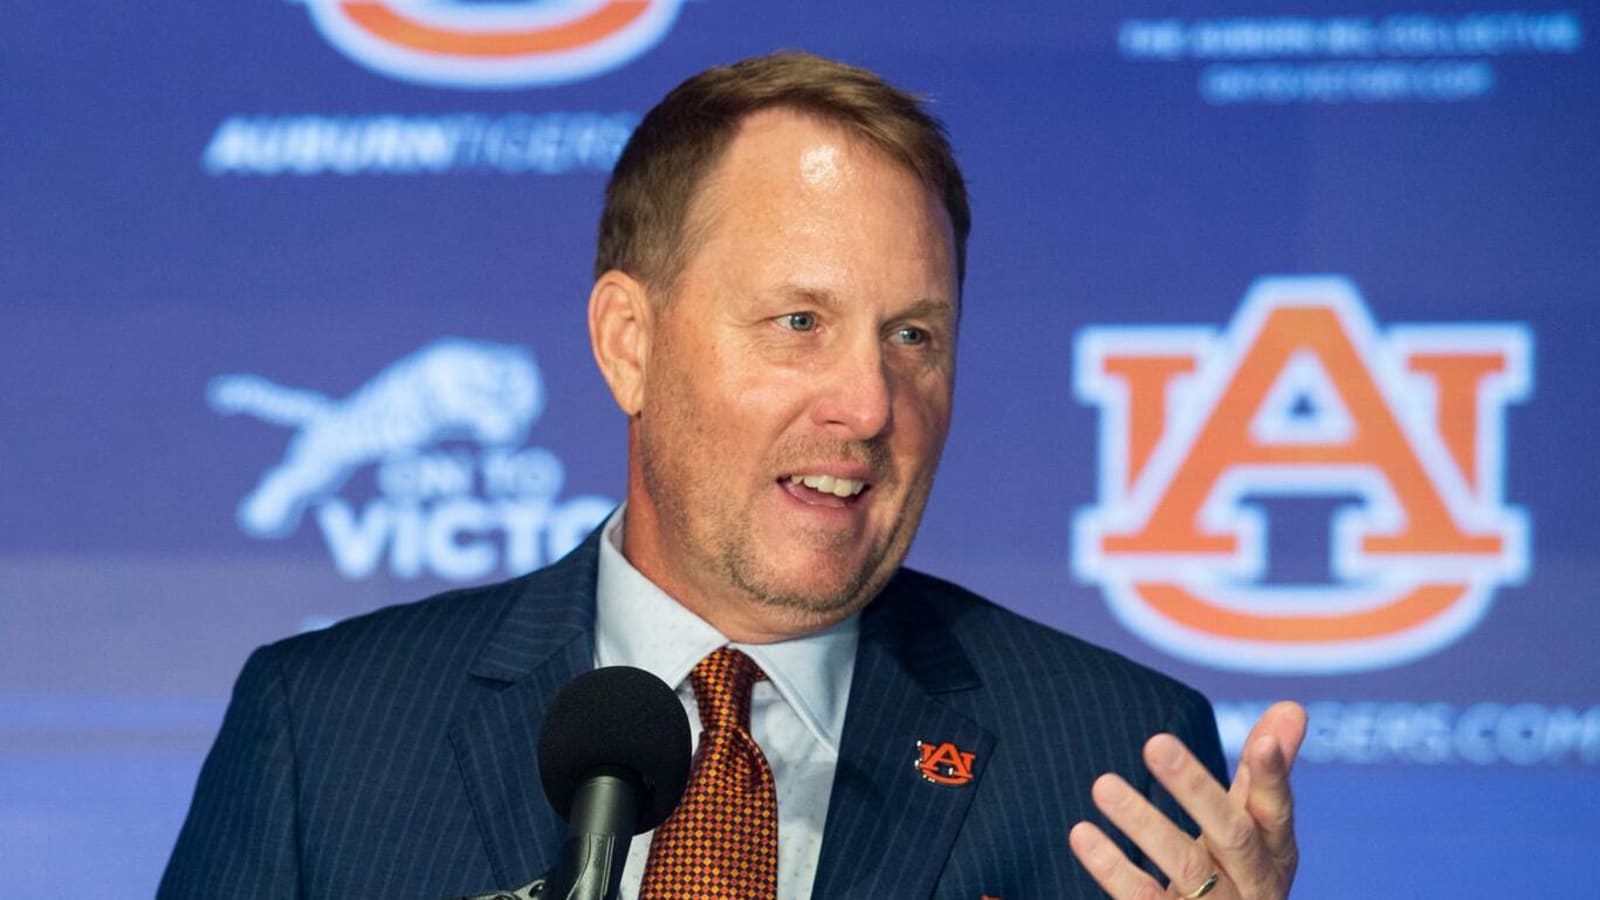 Hugh Freeze has suggestion for eliminating tampering